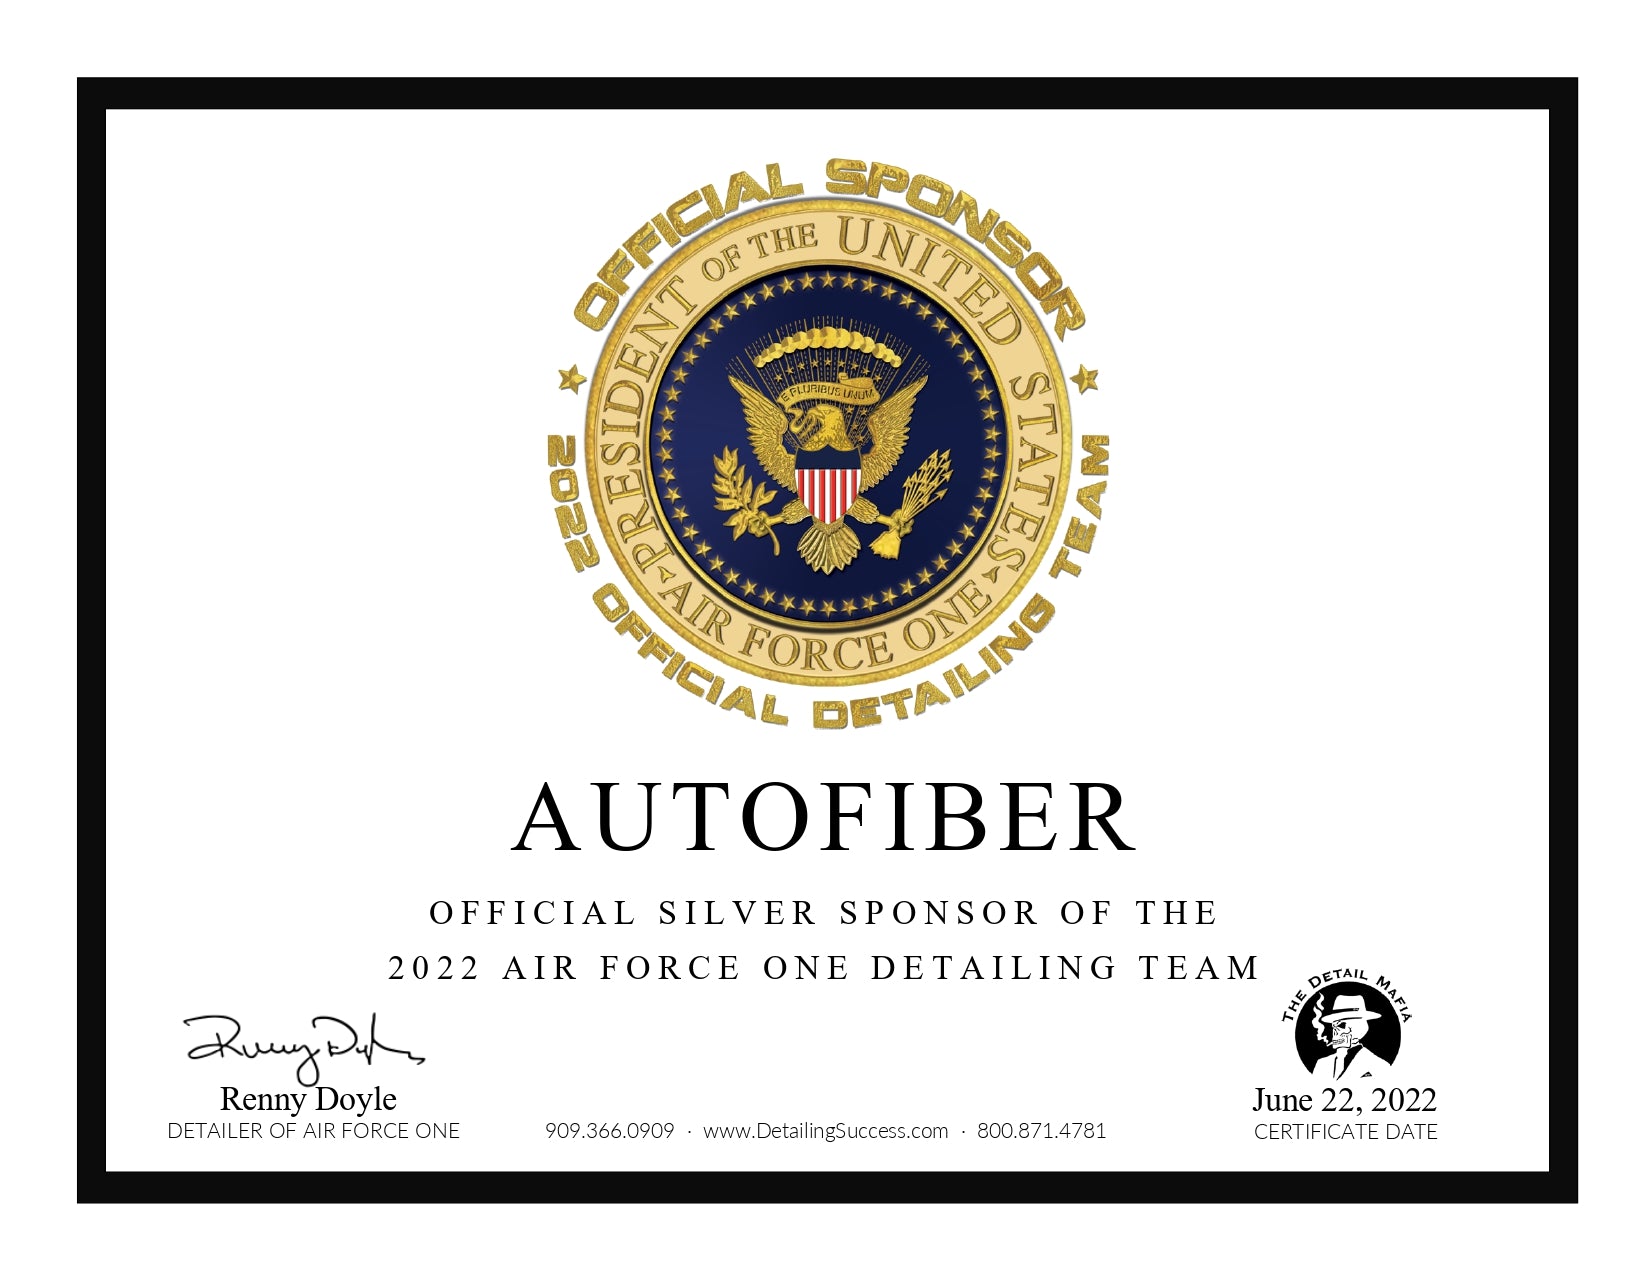 We are an Official Sponsor of the 2022 Air Force One Detailing Team!